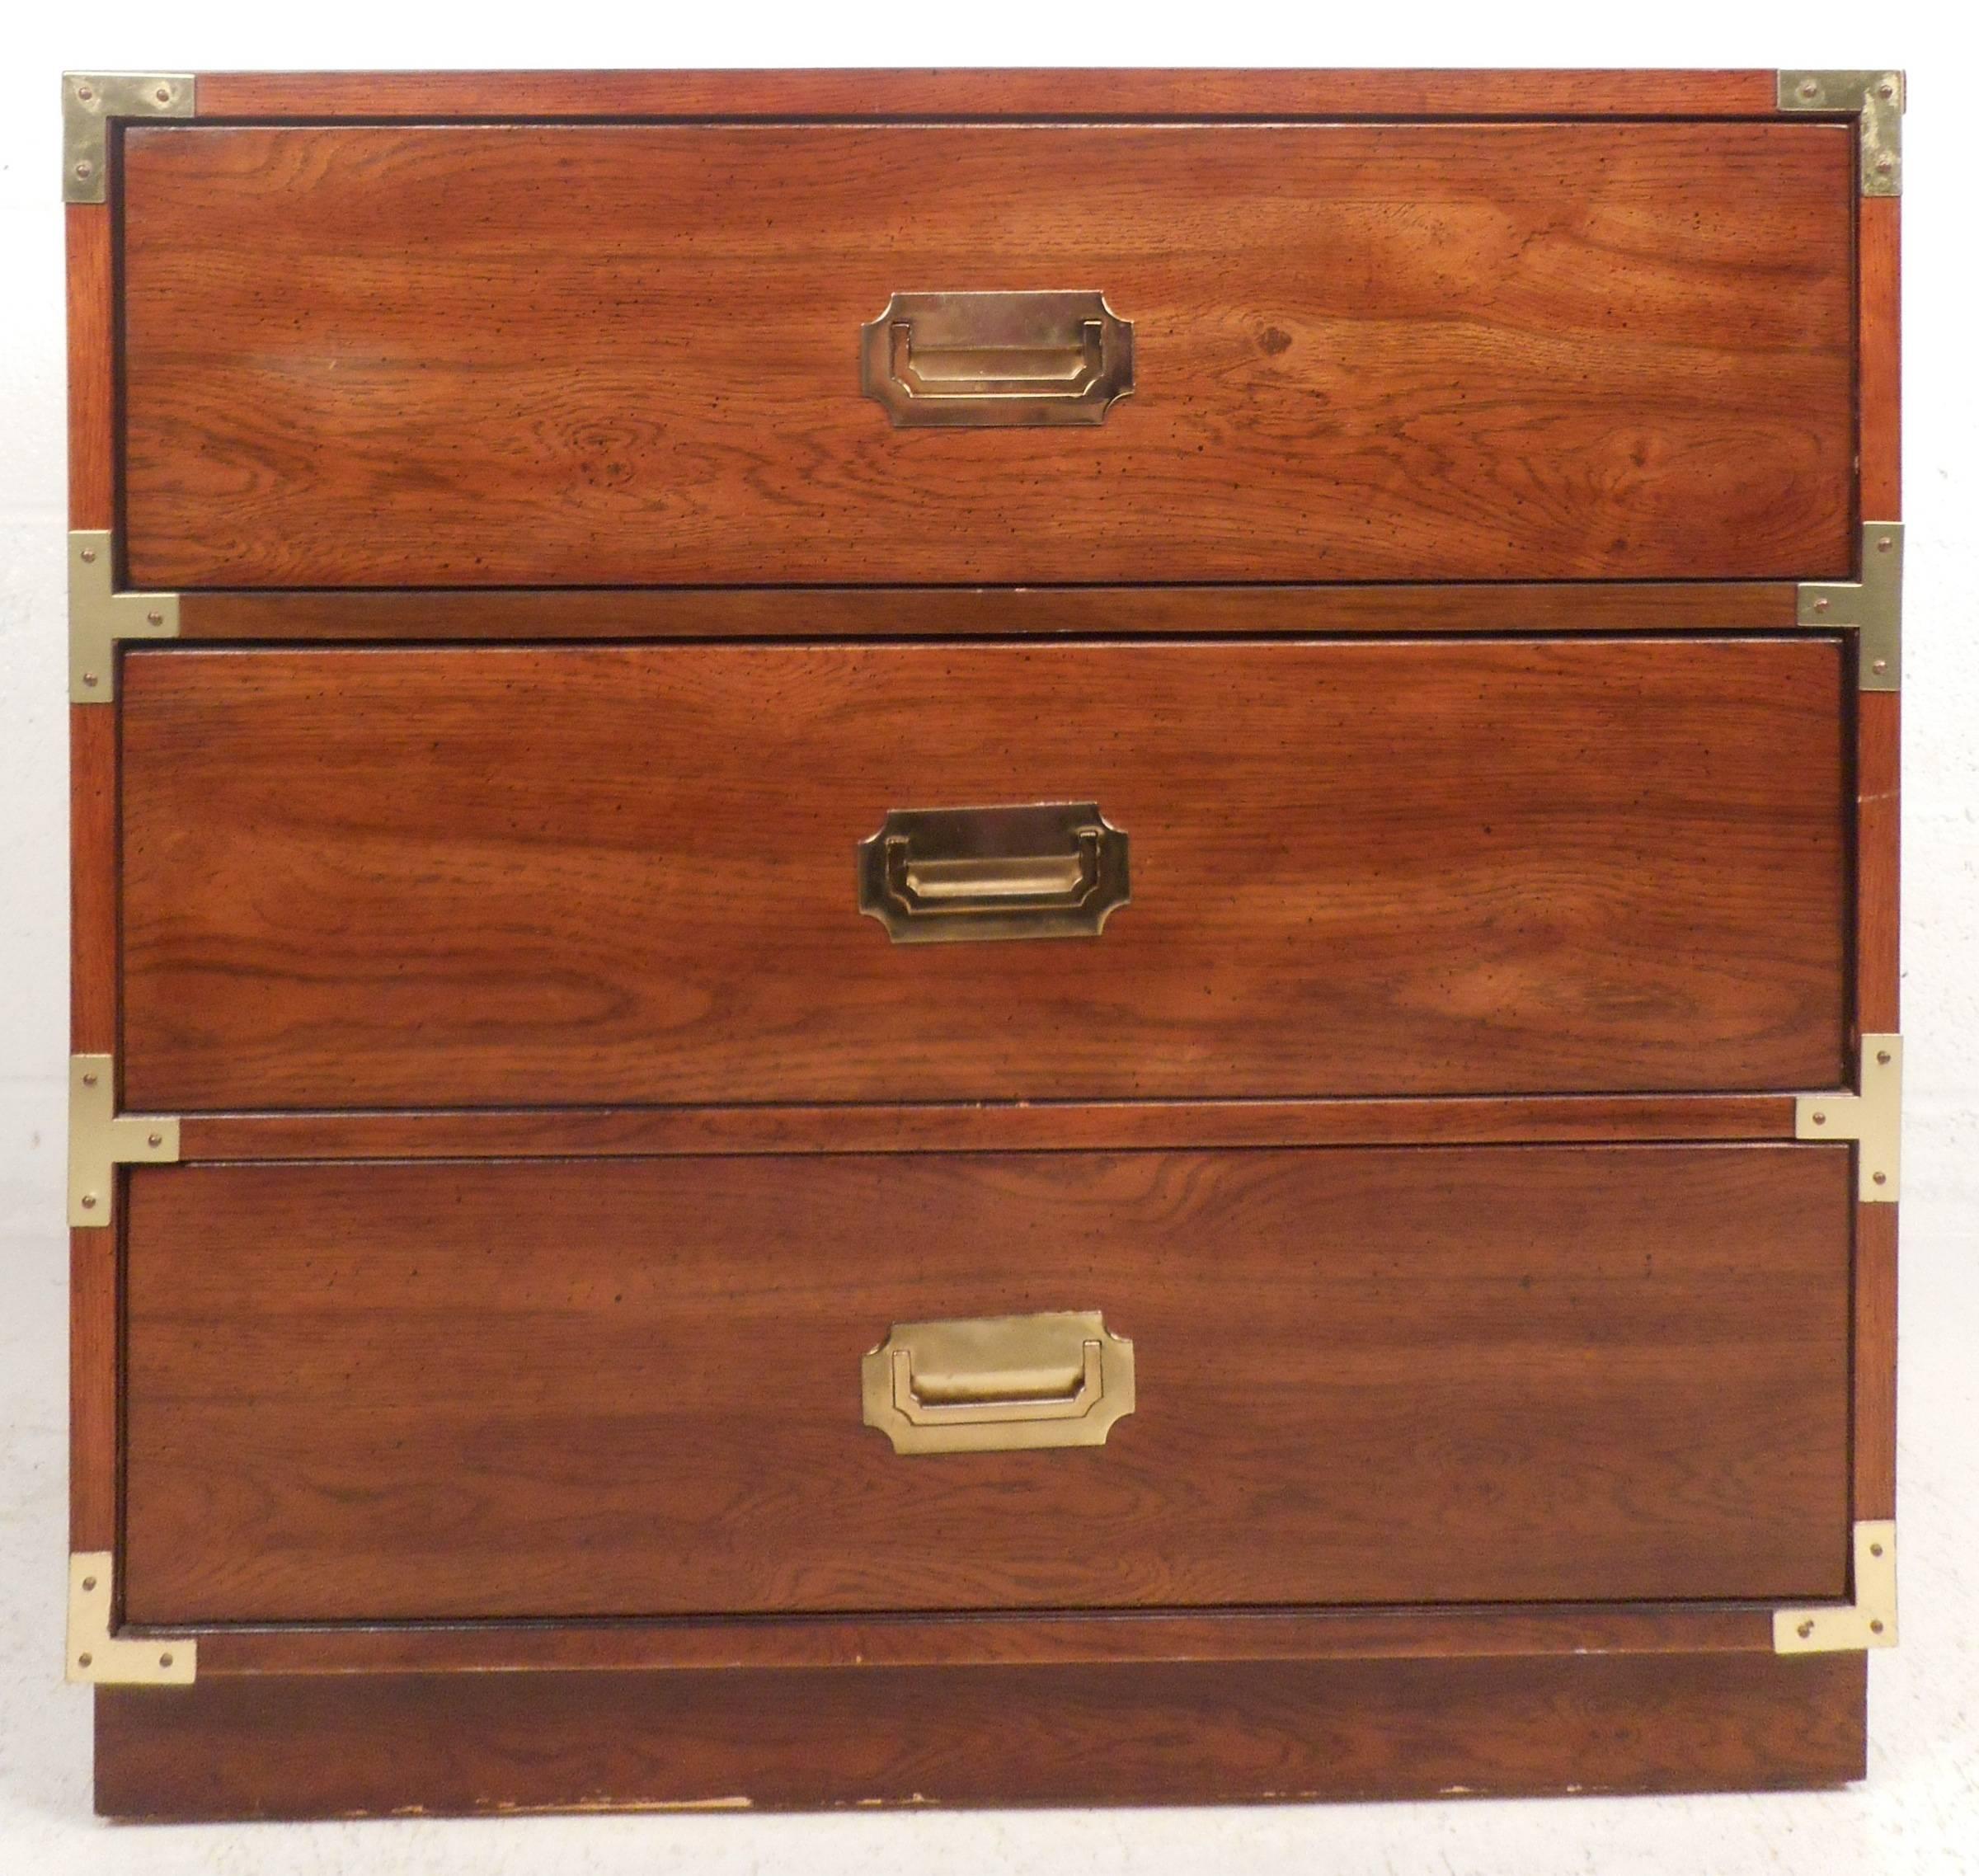 Stunning vintage modern Campaign style chest features three hefty drawers with unique brass pulls on each. The stylish brass detail on the corners of each drawer and the gorgeous walnut wood grain makes this Mid-Century piece the perfect addition to